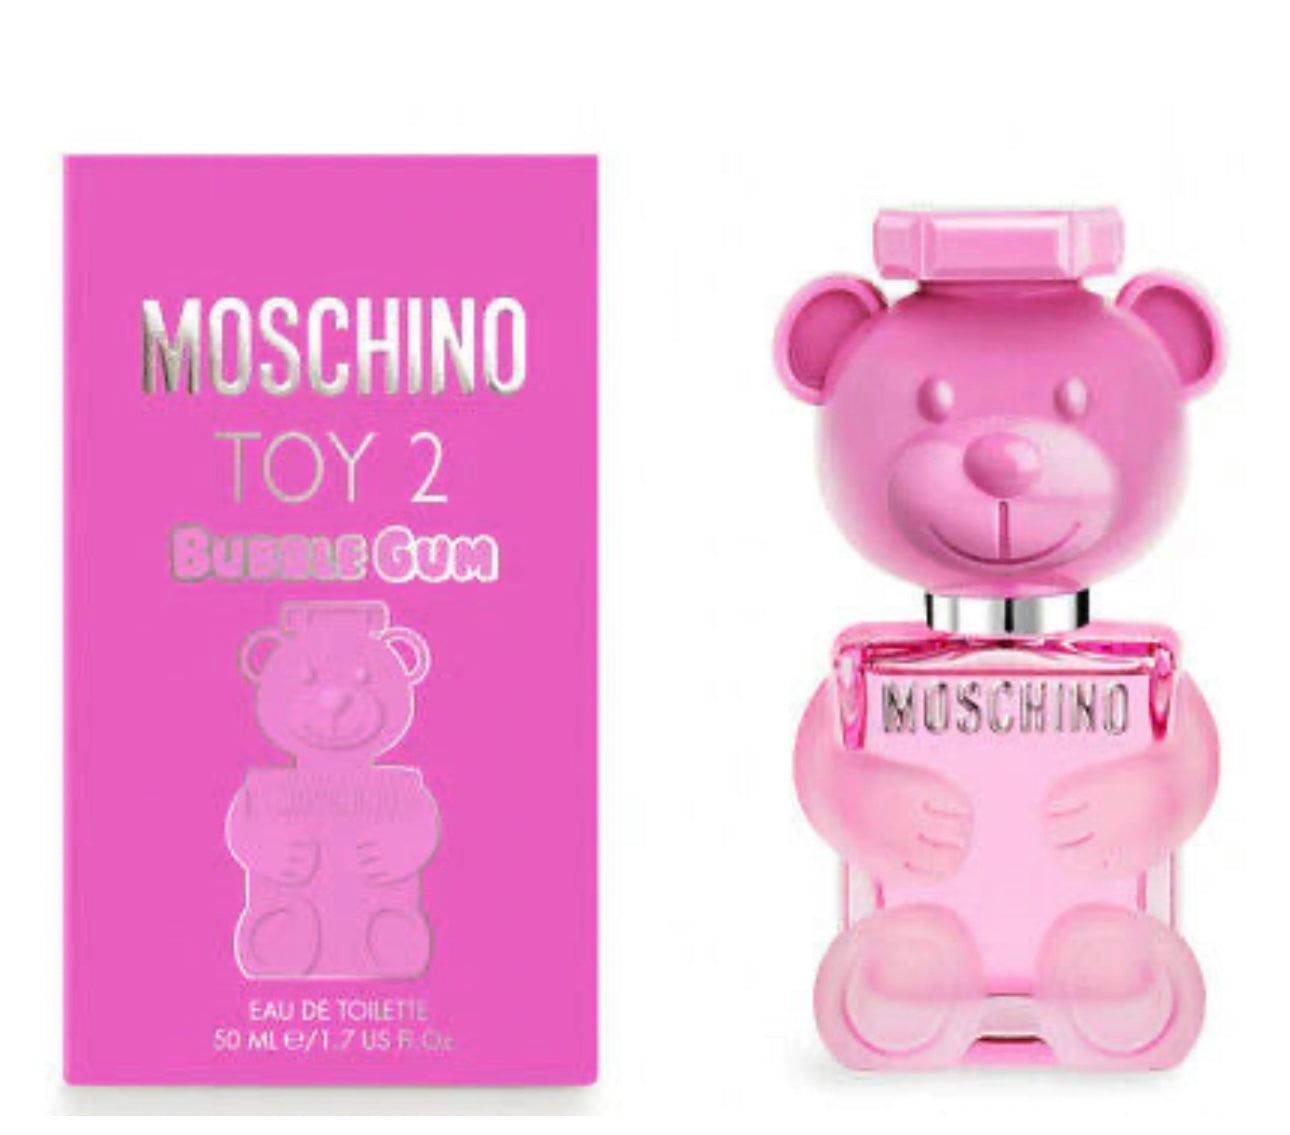 Moschino Toy 2 Bubble Gum EdT